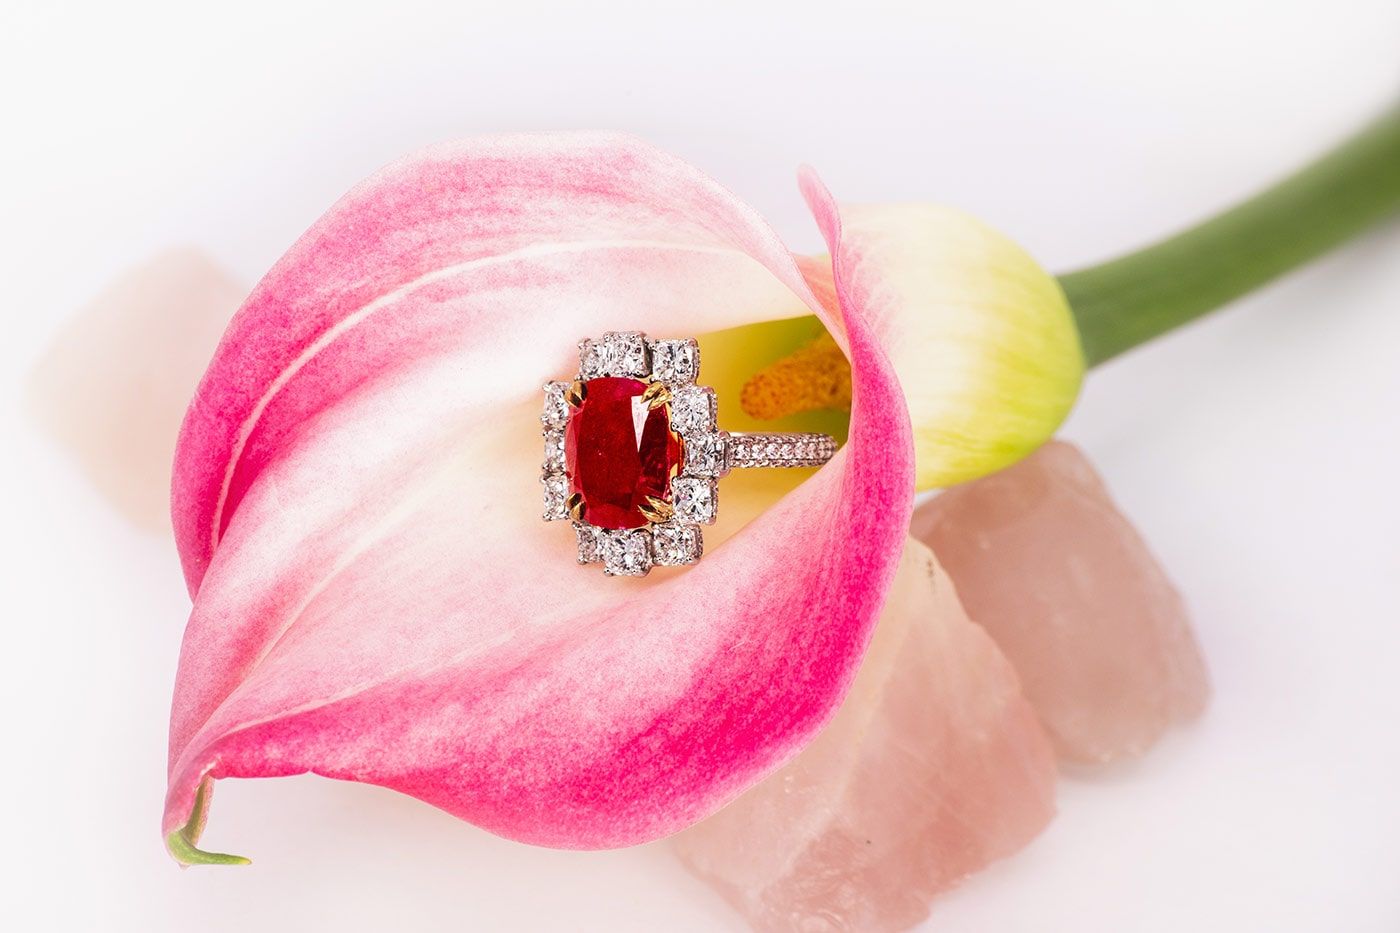 Qiu Fine Jewelry ring with an 8.18 carat unheated Burmese Pigeon's Blood ruby and 5 carats of diamonds